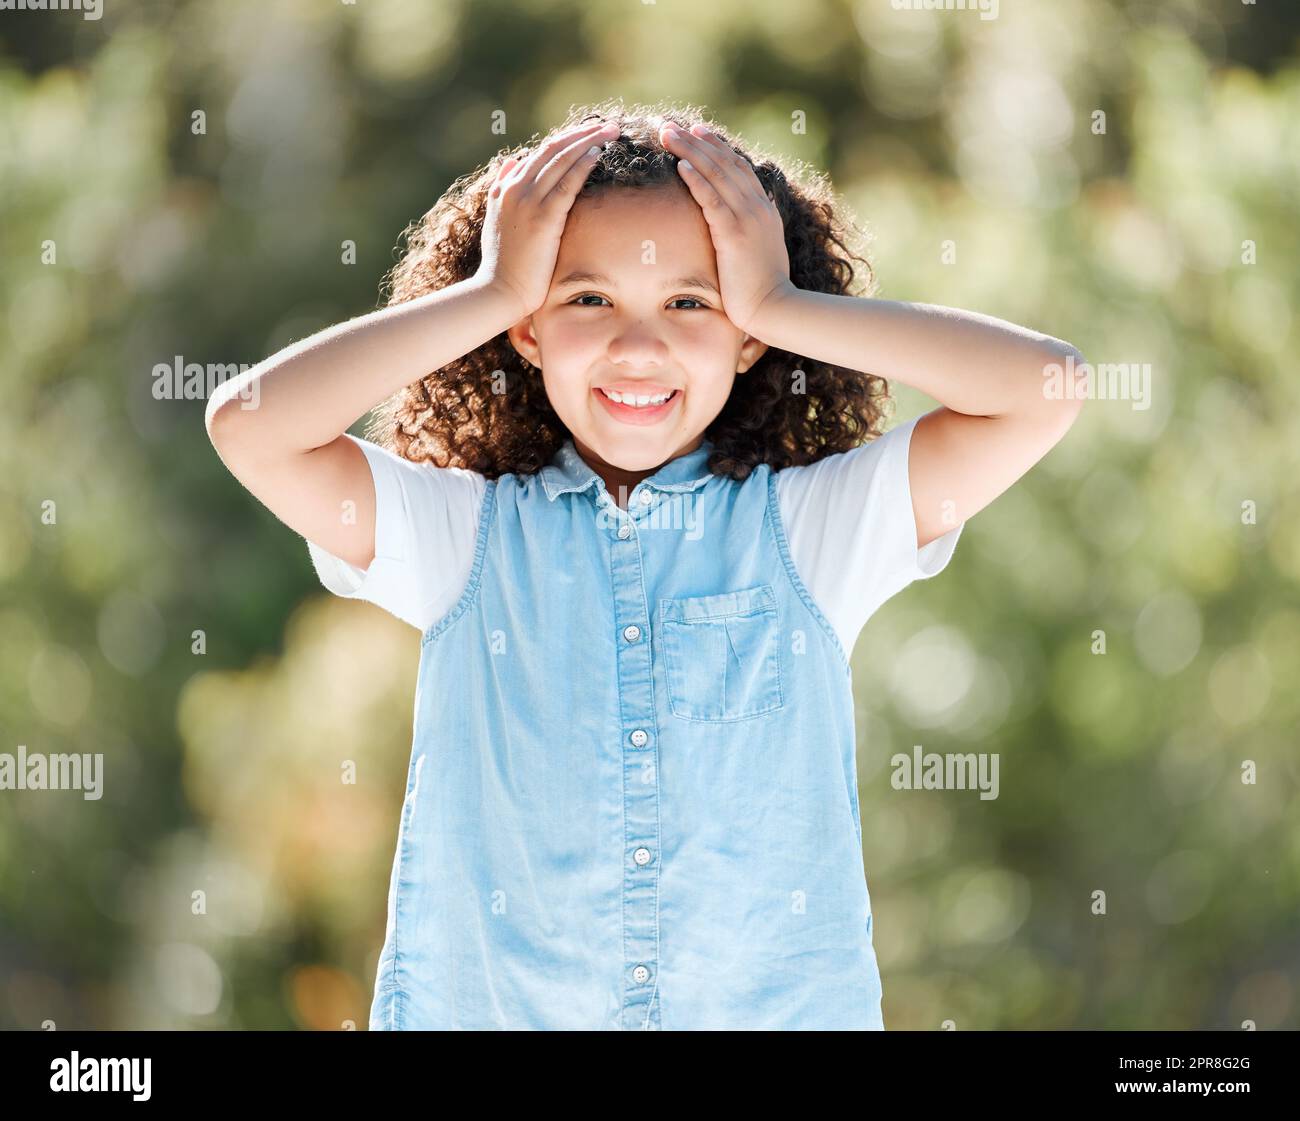 Being little is kind of a big deal. Shot of an adorable little girl standing outside. Stock Photo